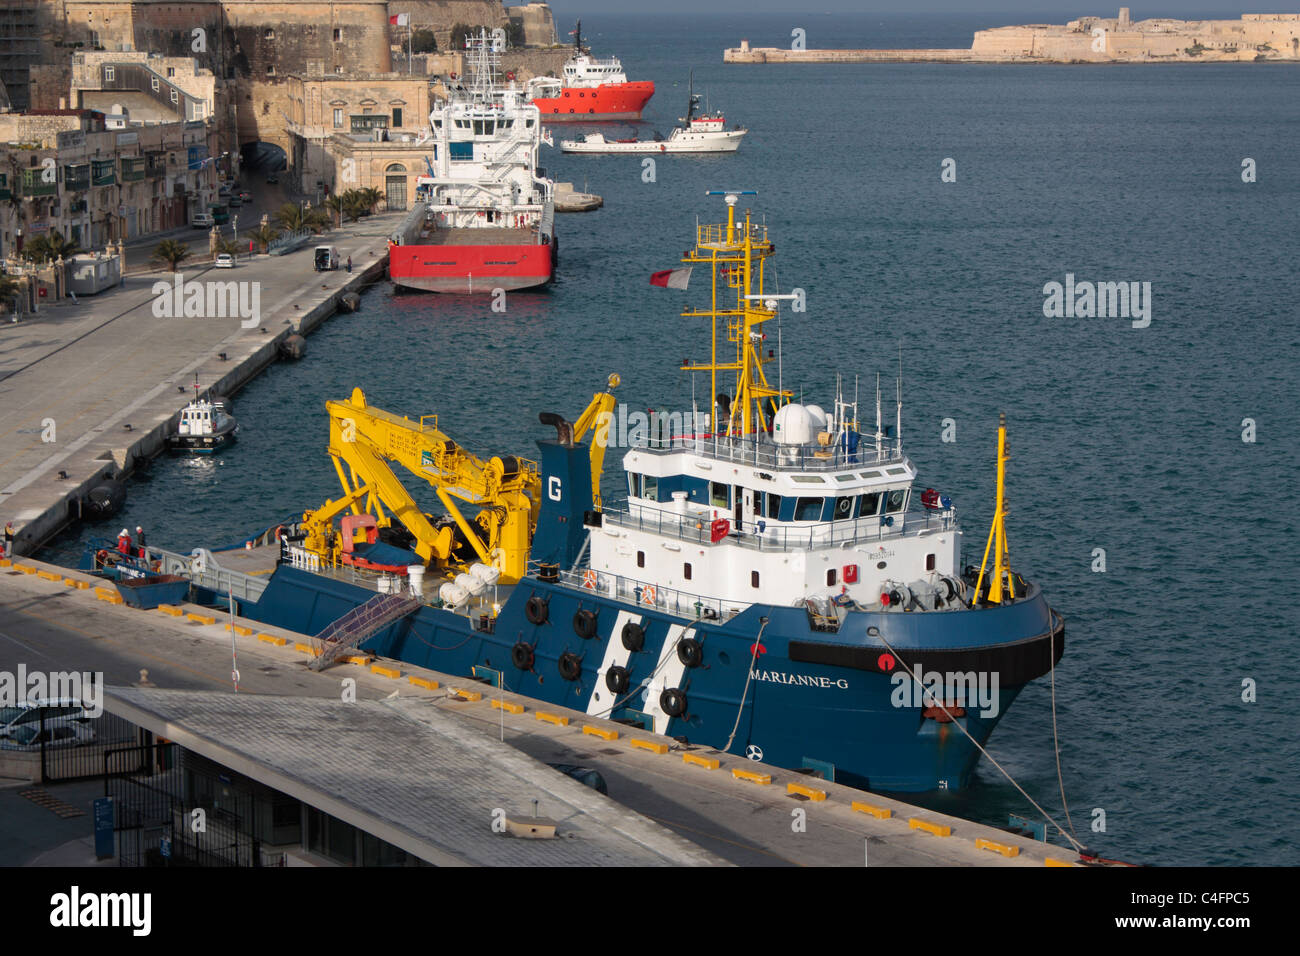 The offshore supply ship Marianne-G in Malta's Grand Harbour Stock Photo